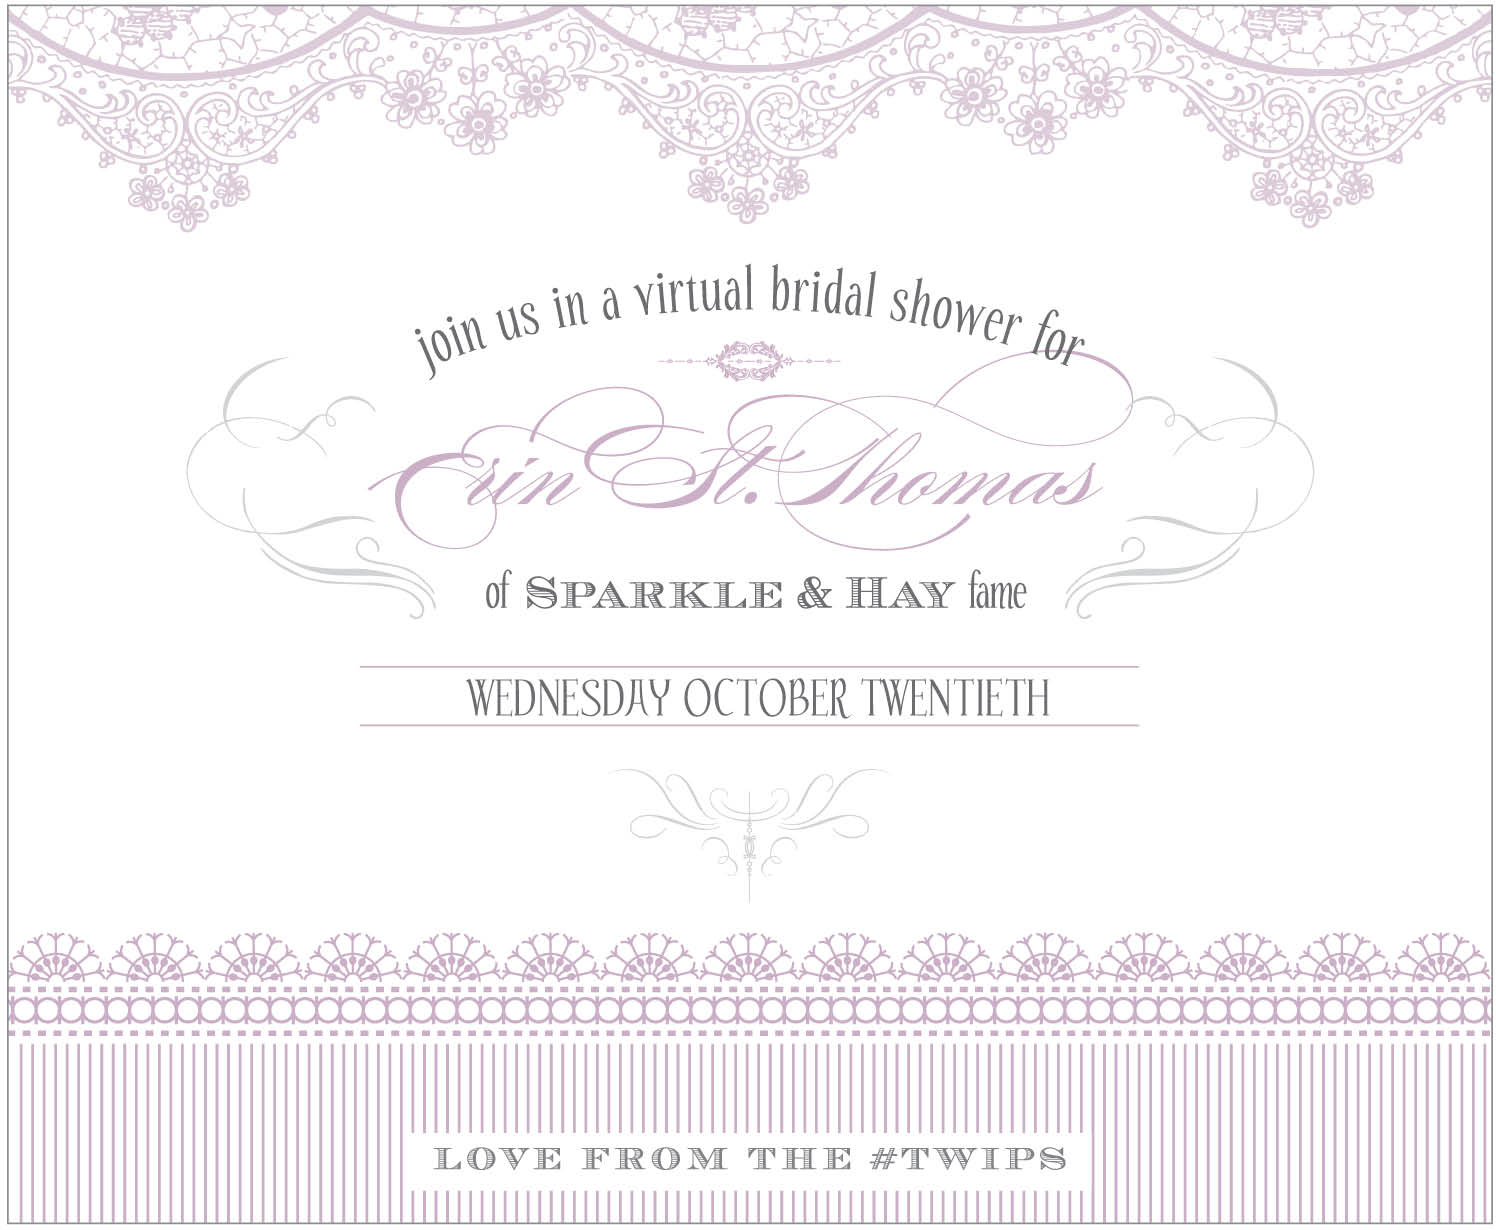 How should a bridal shower card be worded?